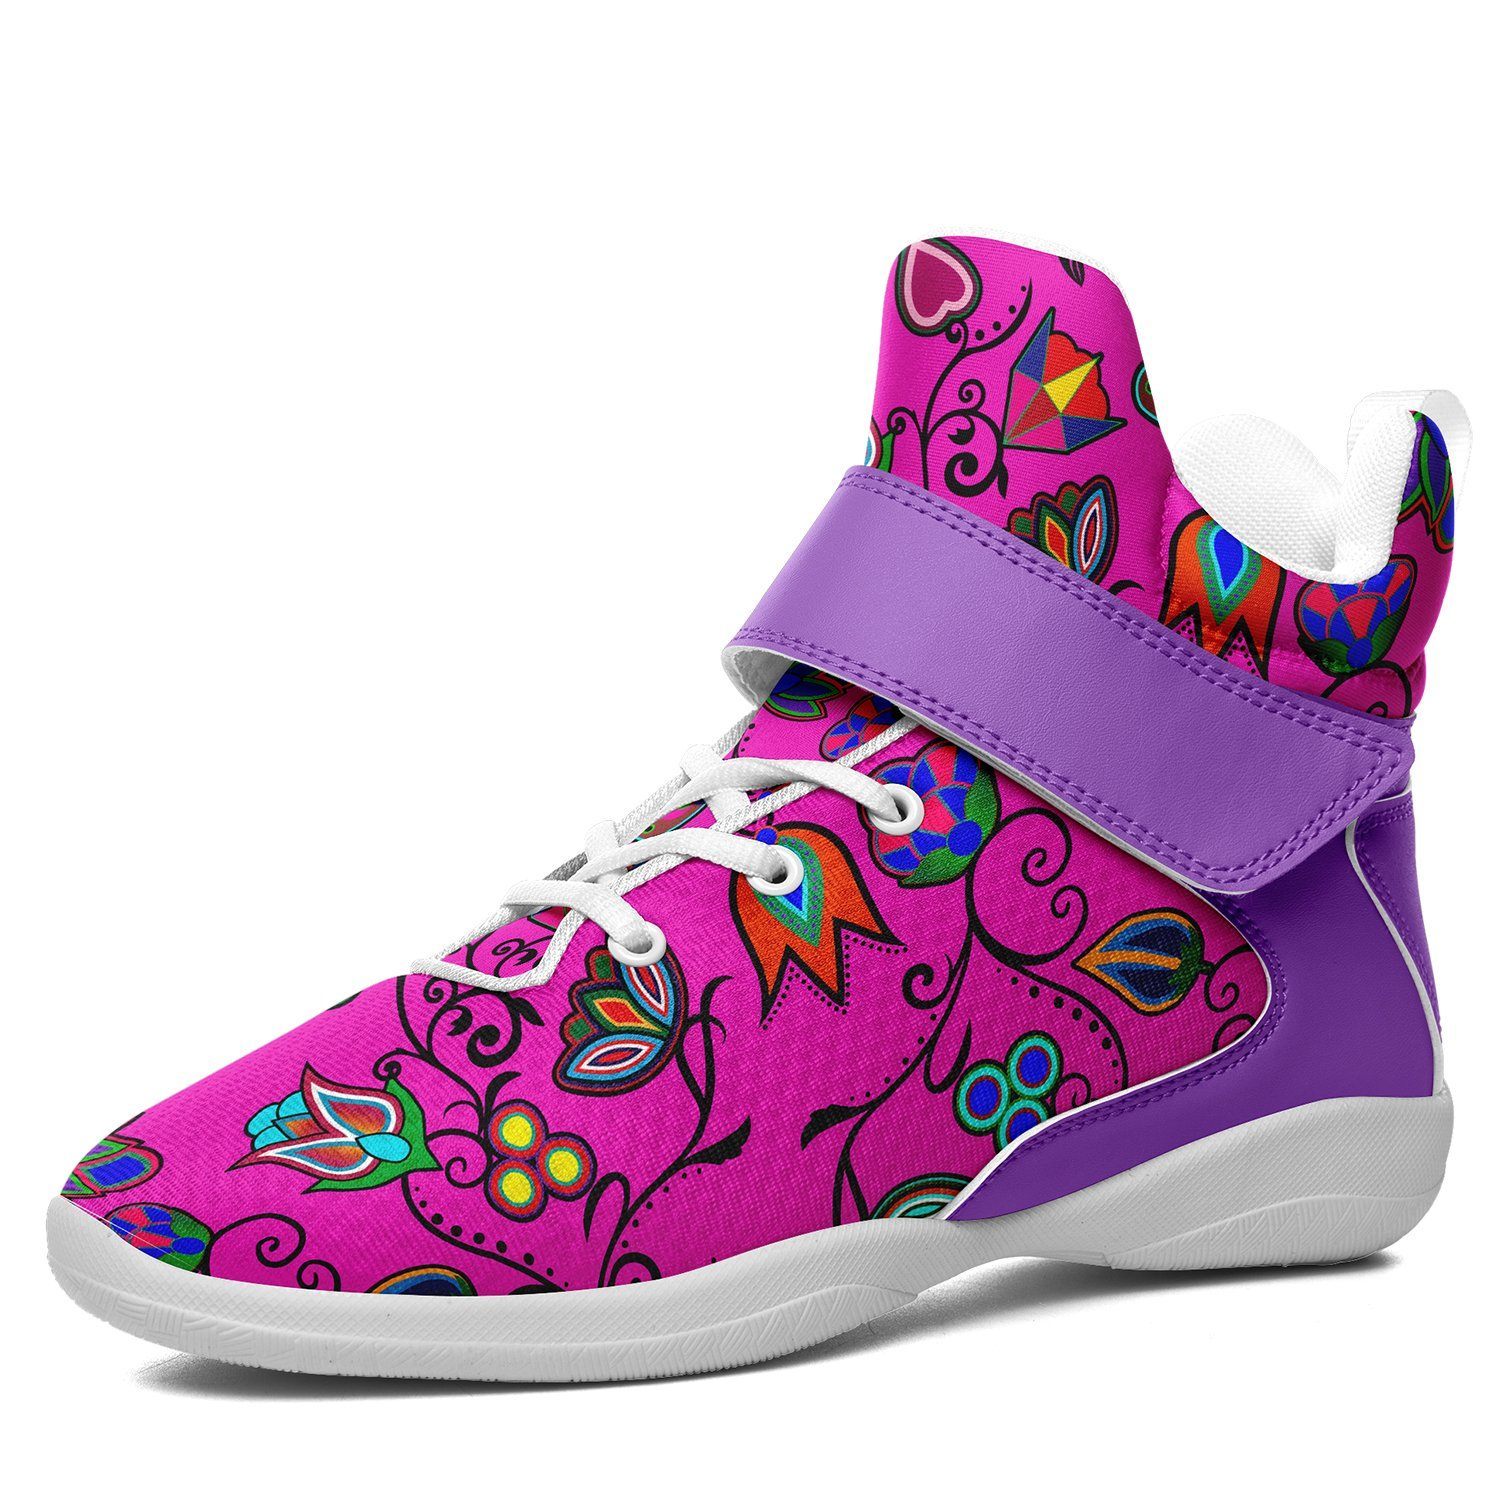 Indigenous Paisley Kid's Ipottaa Basketball / Sport High Top Shoes 49 Dzine US Child 12.5 / EUR 30 White Sole with Lavender Strap 